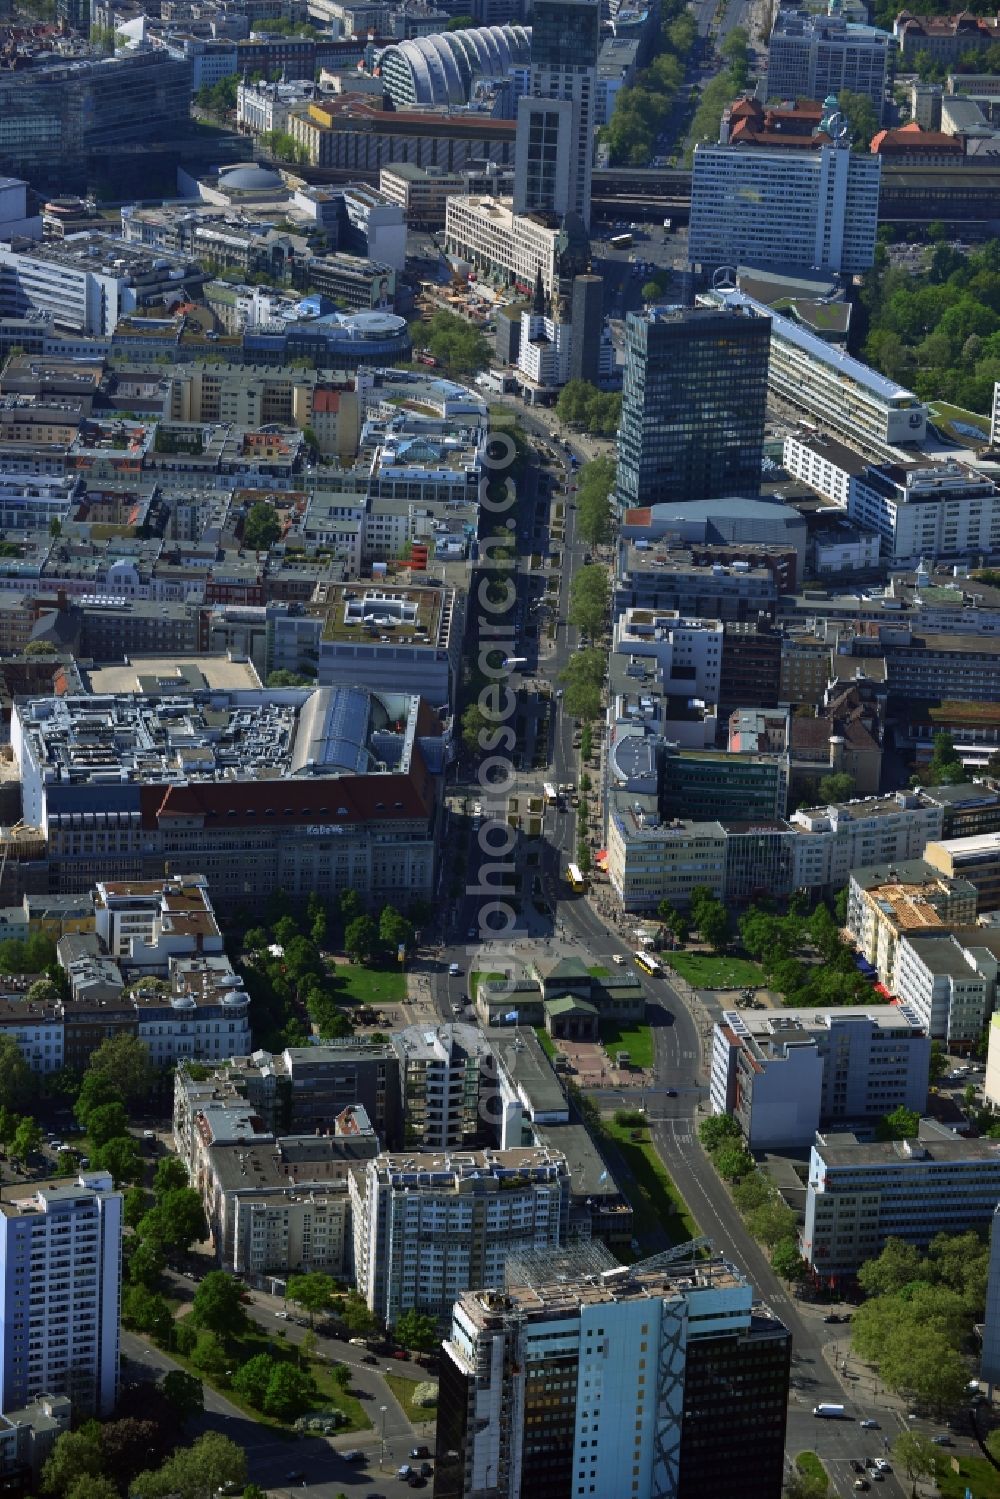 Aerial photograph Berlin - Tauentzienstrasse connects the Wittenberg Platz in Schoeneberg district with Breitscheidplatz in the Charlottenburg district. This stretch of road is the hip business district of the City West. Known is the department store KaDeWe. More Buying house and textile goods chains have their branches here. The Europe Center forms the western end at Breitscheidplatz. There the Emperor Wilhlem Memorial Church, the skyscraper Zoofenster with the luxury Waldorf Astoria Hotel